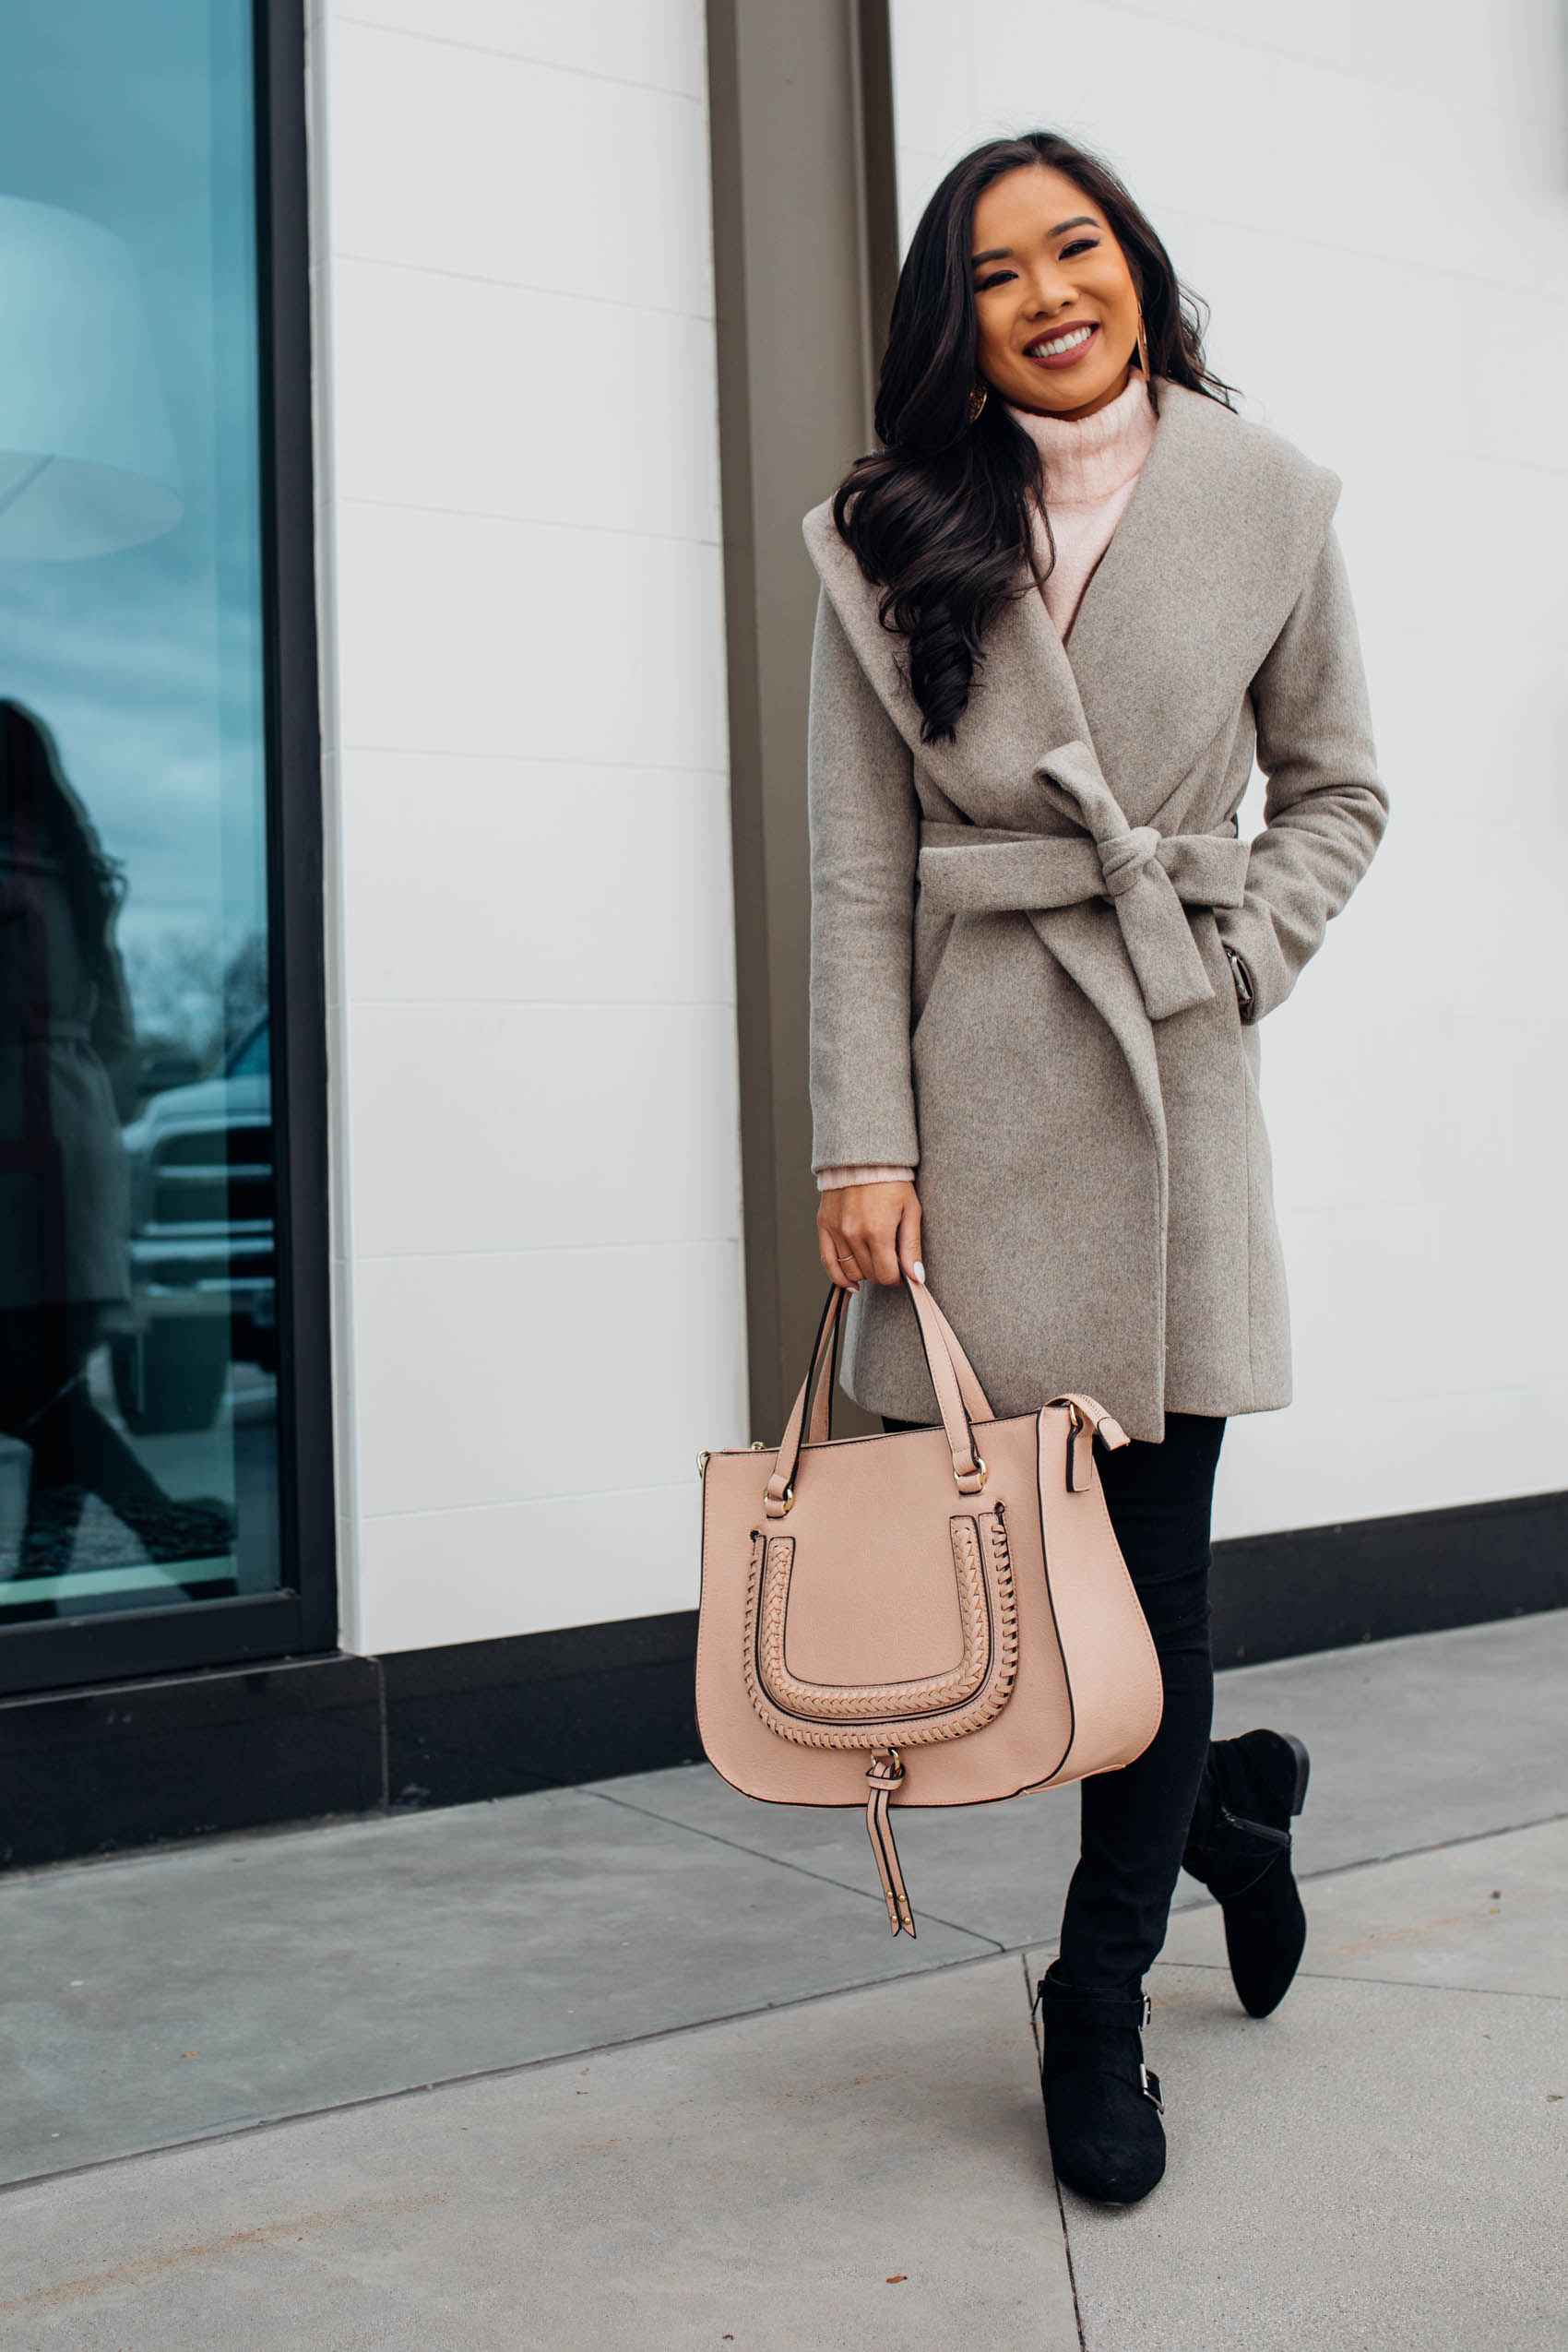 Blogger Hoang-Kim wears a wool wrap coat for a winter outfit